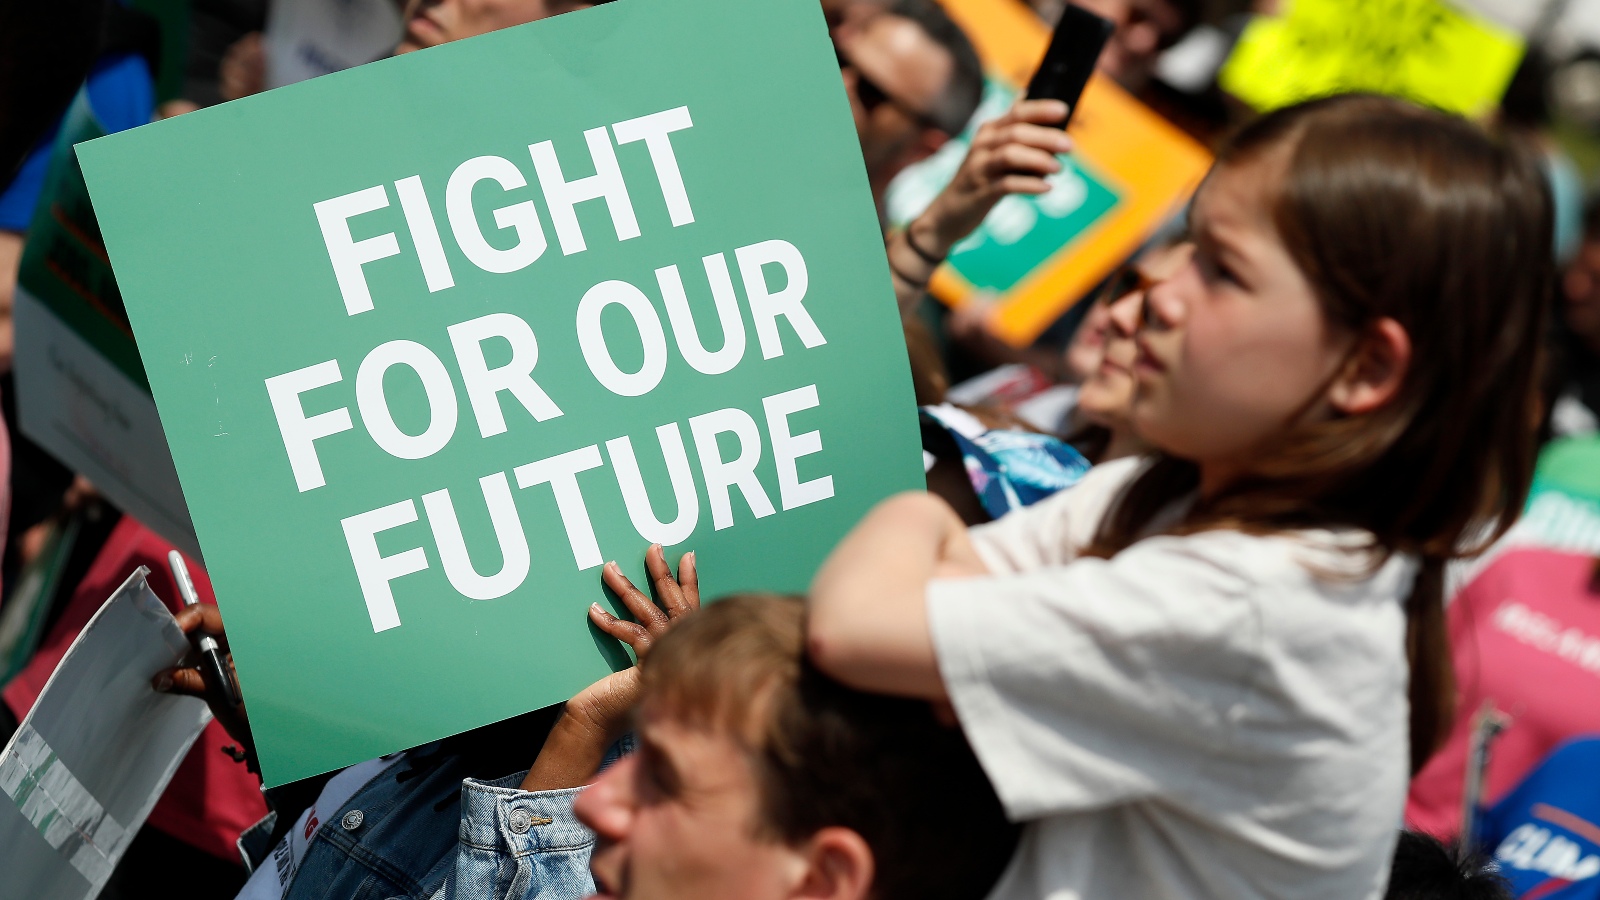 A sign at a busy protest says "fight for our future"